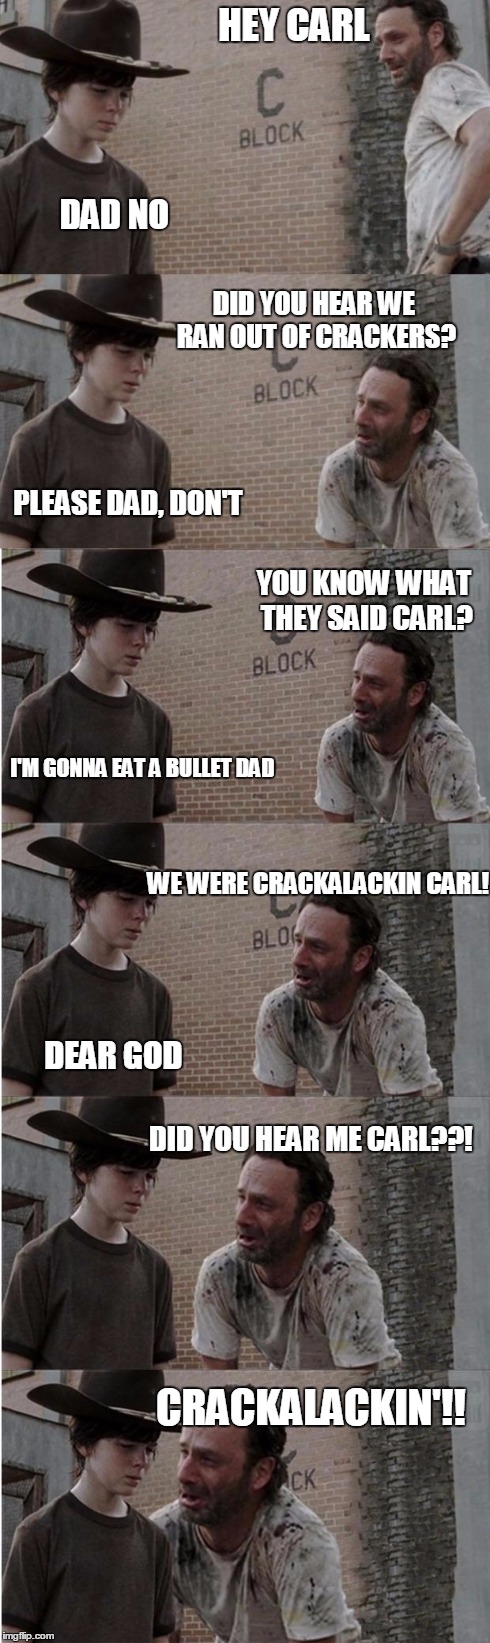 Rick and Carl Longer | HEY CARL DAD NO DID YOU HEAR WE RAN OUT OF CRACKERS? PLEASE DAD, DON'T YOU KNOW WHAT THEY SAID CARL? I'M GONNA EAT A BULLET DAD WE WERE CRAC | image tagged in memes,rick and carl longer | made w/ Imgflip meme maker